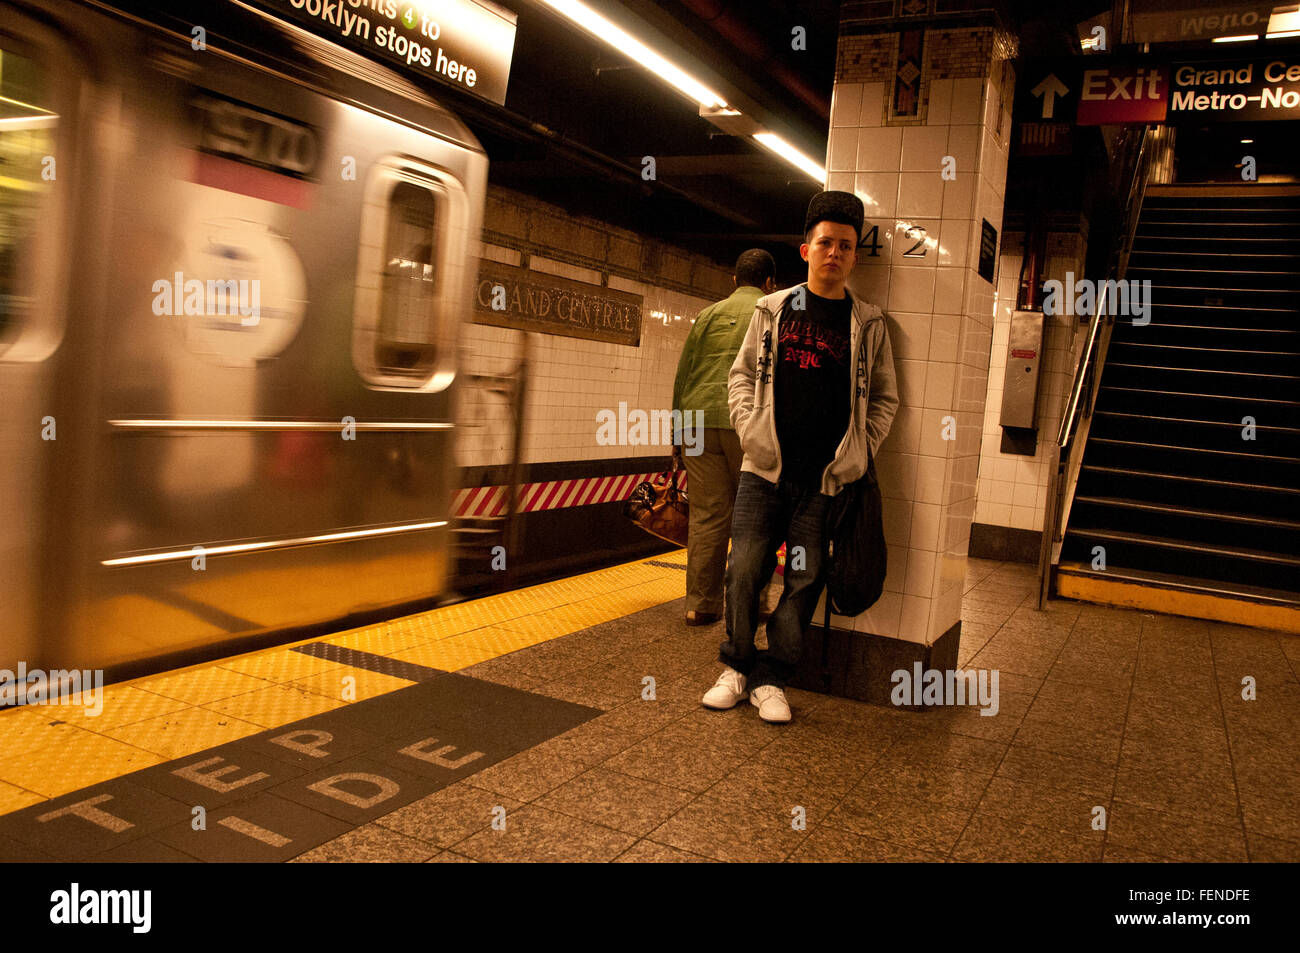 Waiting for a subway train in Grand Central station New York City Stock Photo